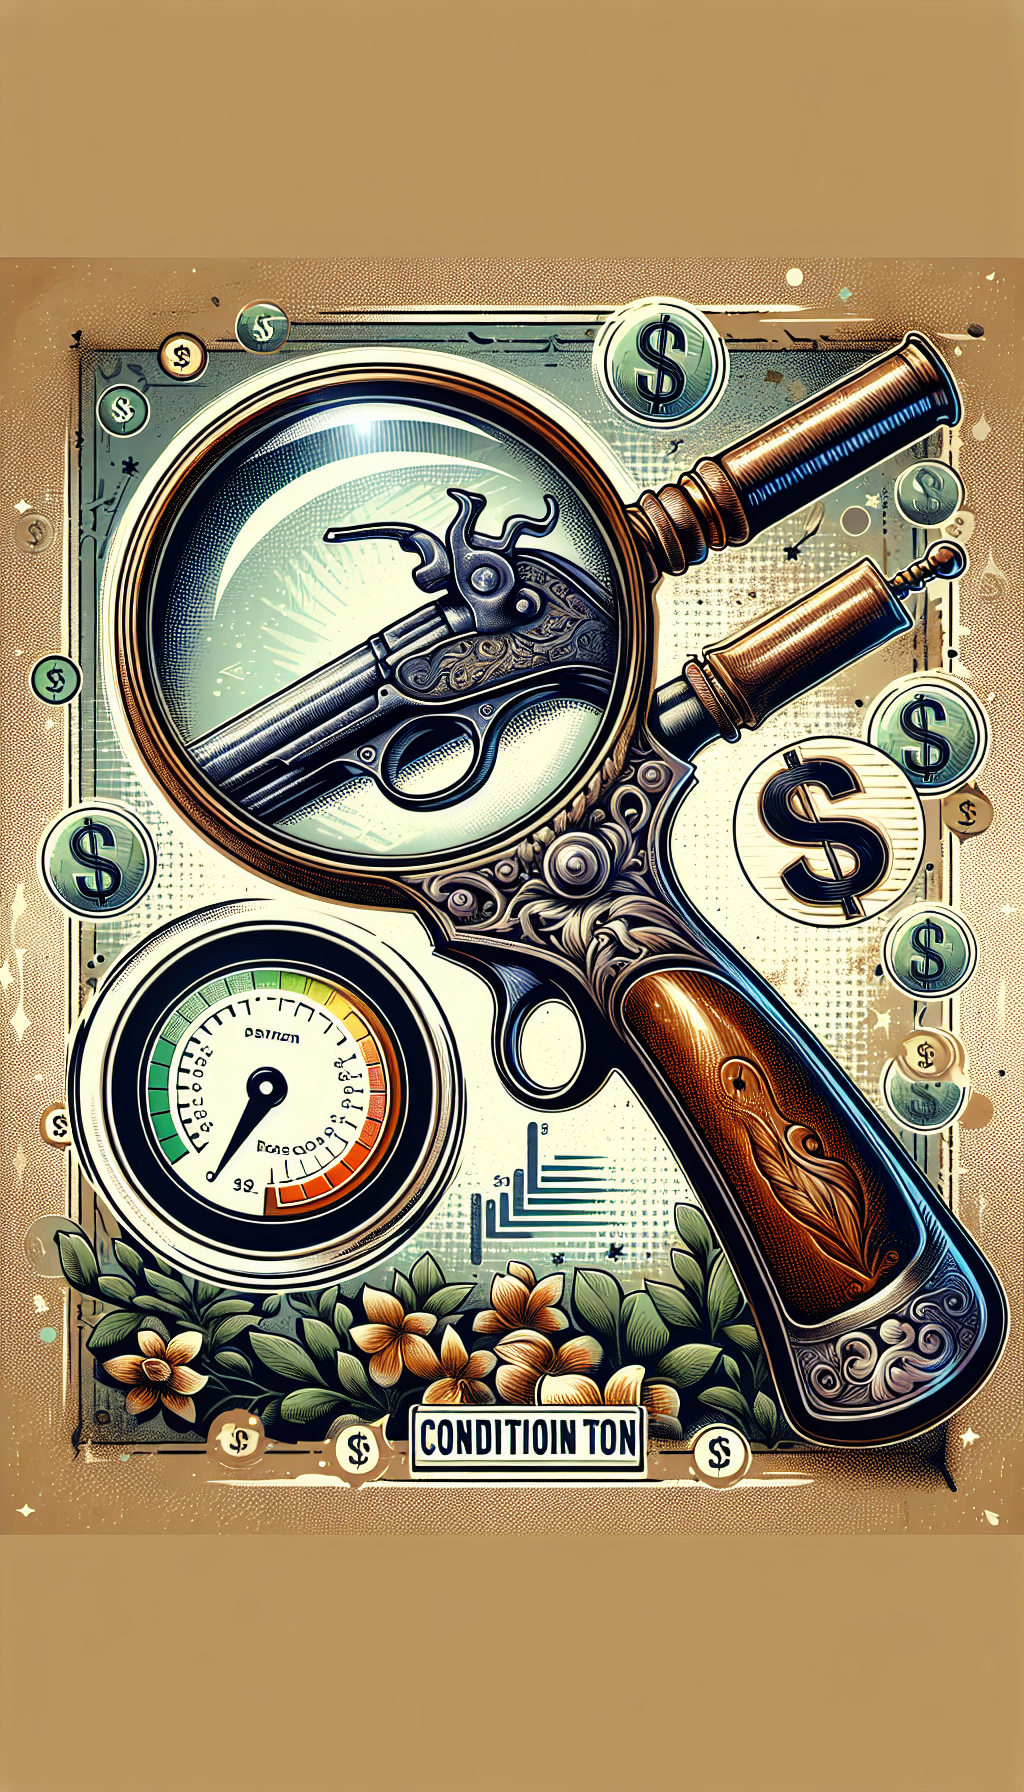 The illustration depicts an ornate magnifying glass focusing on a classic flintlock pistol toy, revealing intricate details and patina. Side by side, a mint condition toy revolver gleams with worth, contrasted by a stylized 'condition meter' graphic that transitions from pristine to worn. Swirls of dollar signs and question marks float around, symbolizing the fluctuating value based on condition.